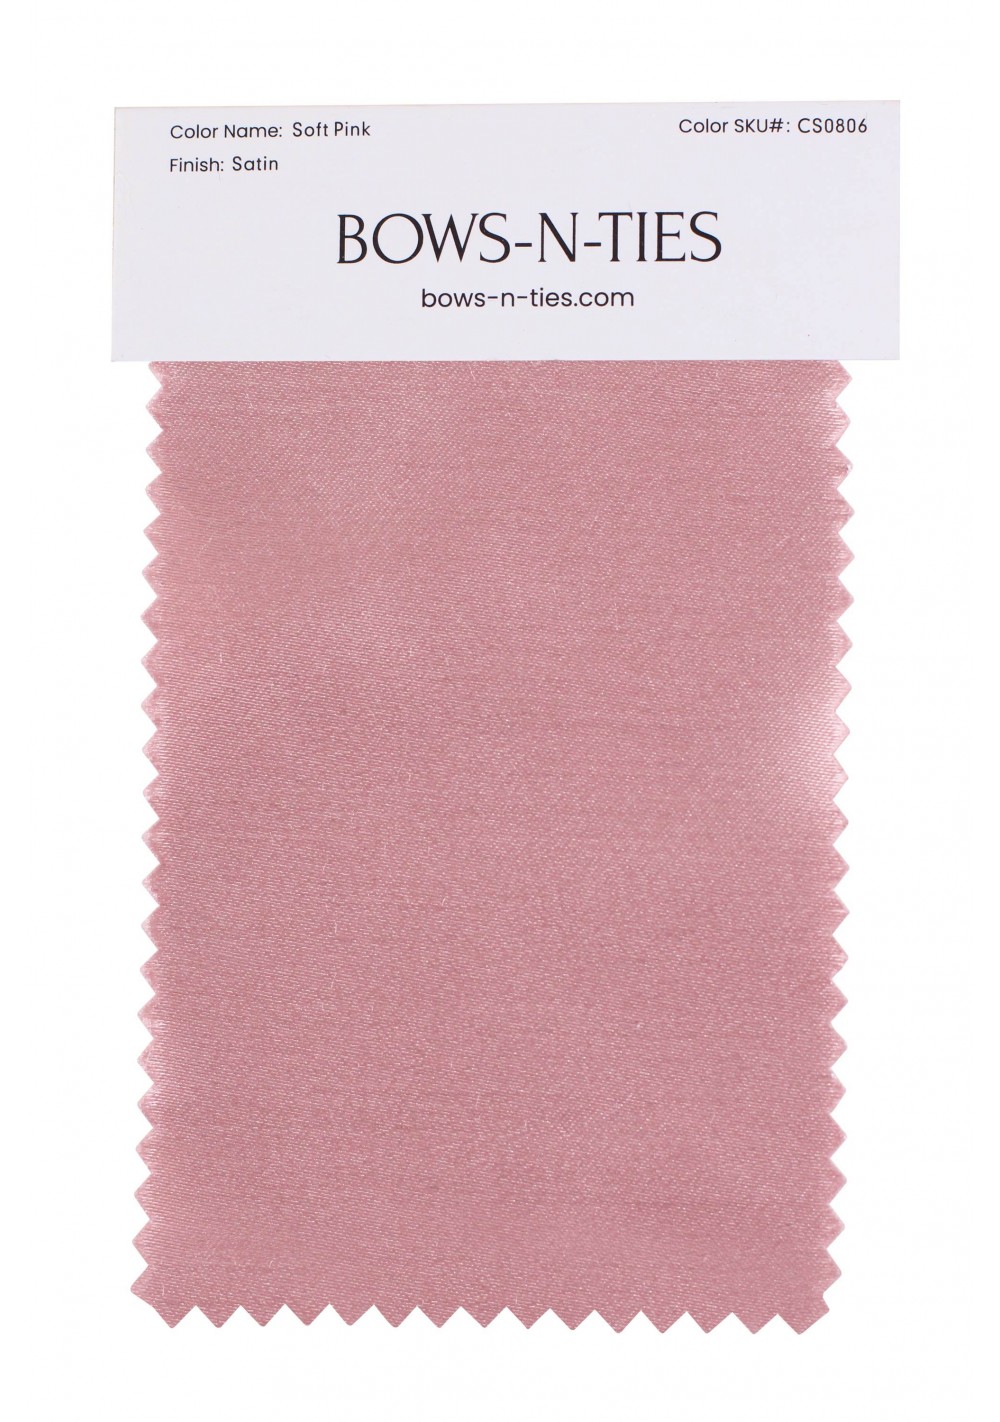 Pink Satin Fabric Swatch, Soft Pink Fabric Swatch for Men's Wedding Ties  and Accessories